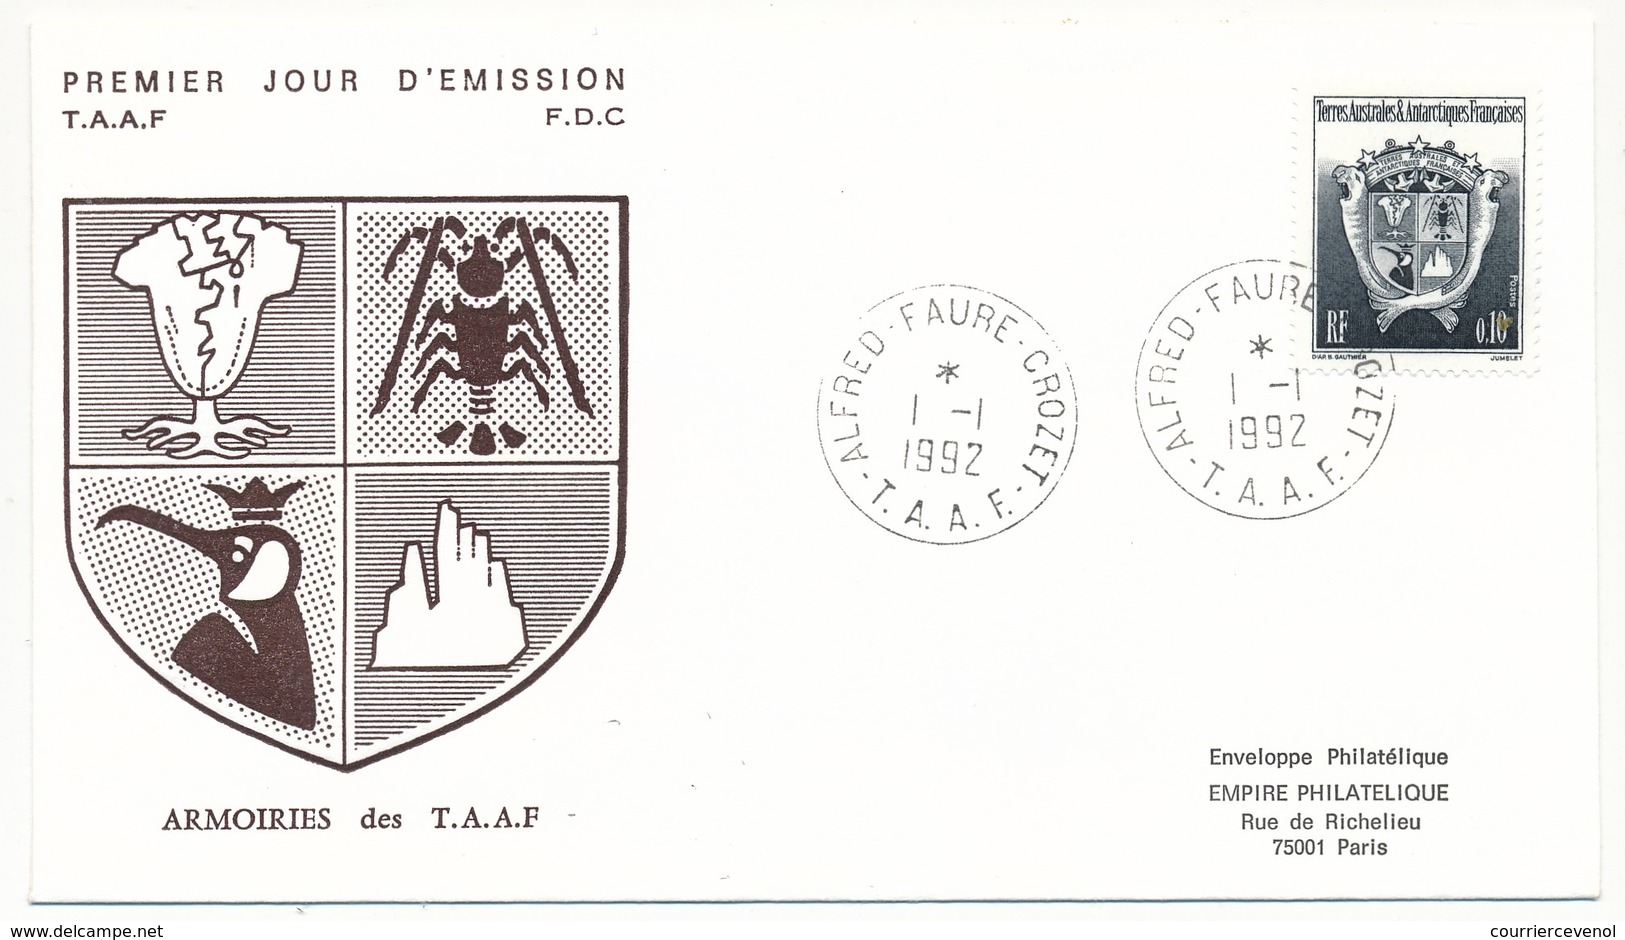 TAAF - Enveloppe FDC - 0,10 Armoiries - Alfred Faure Crozet - 1-1-1992 - FDC